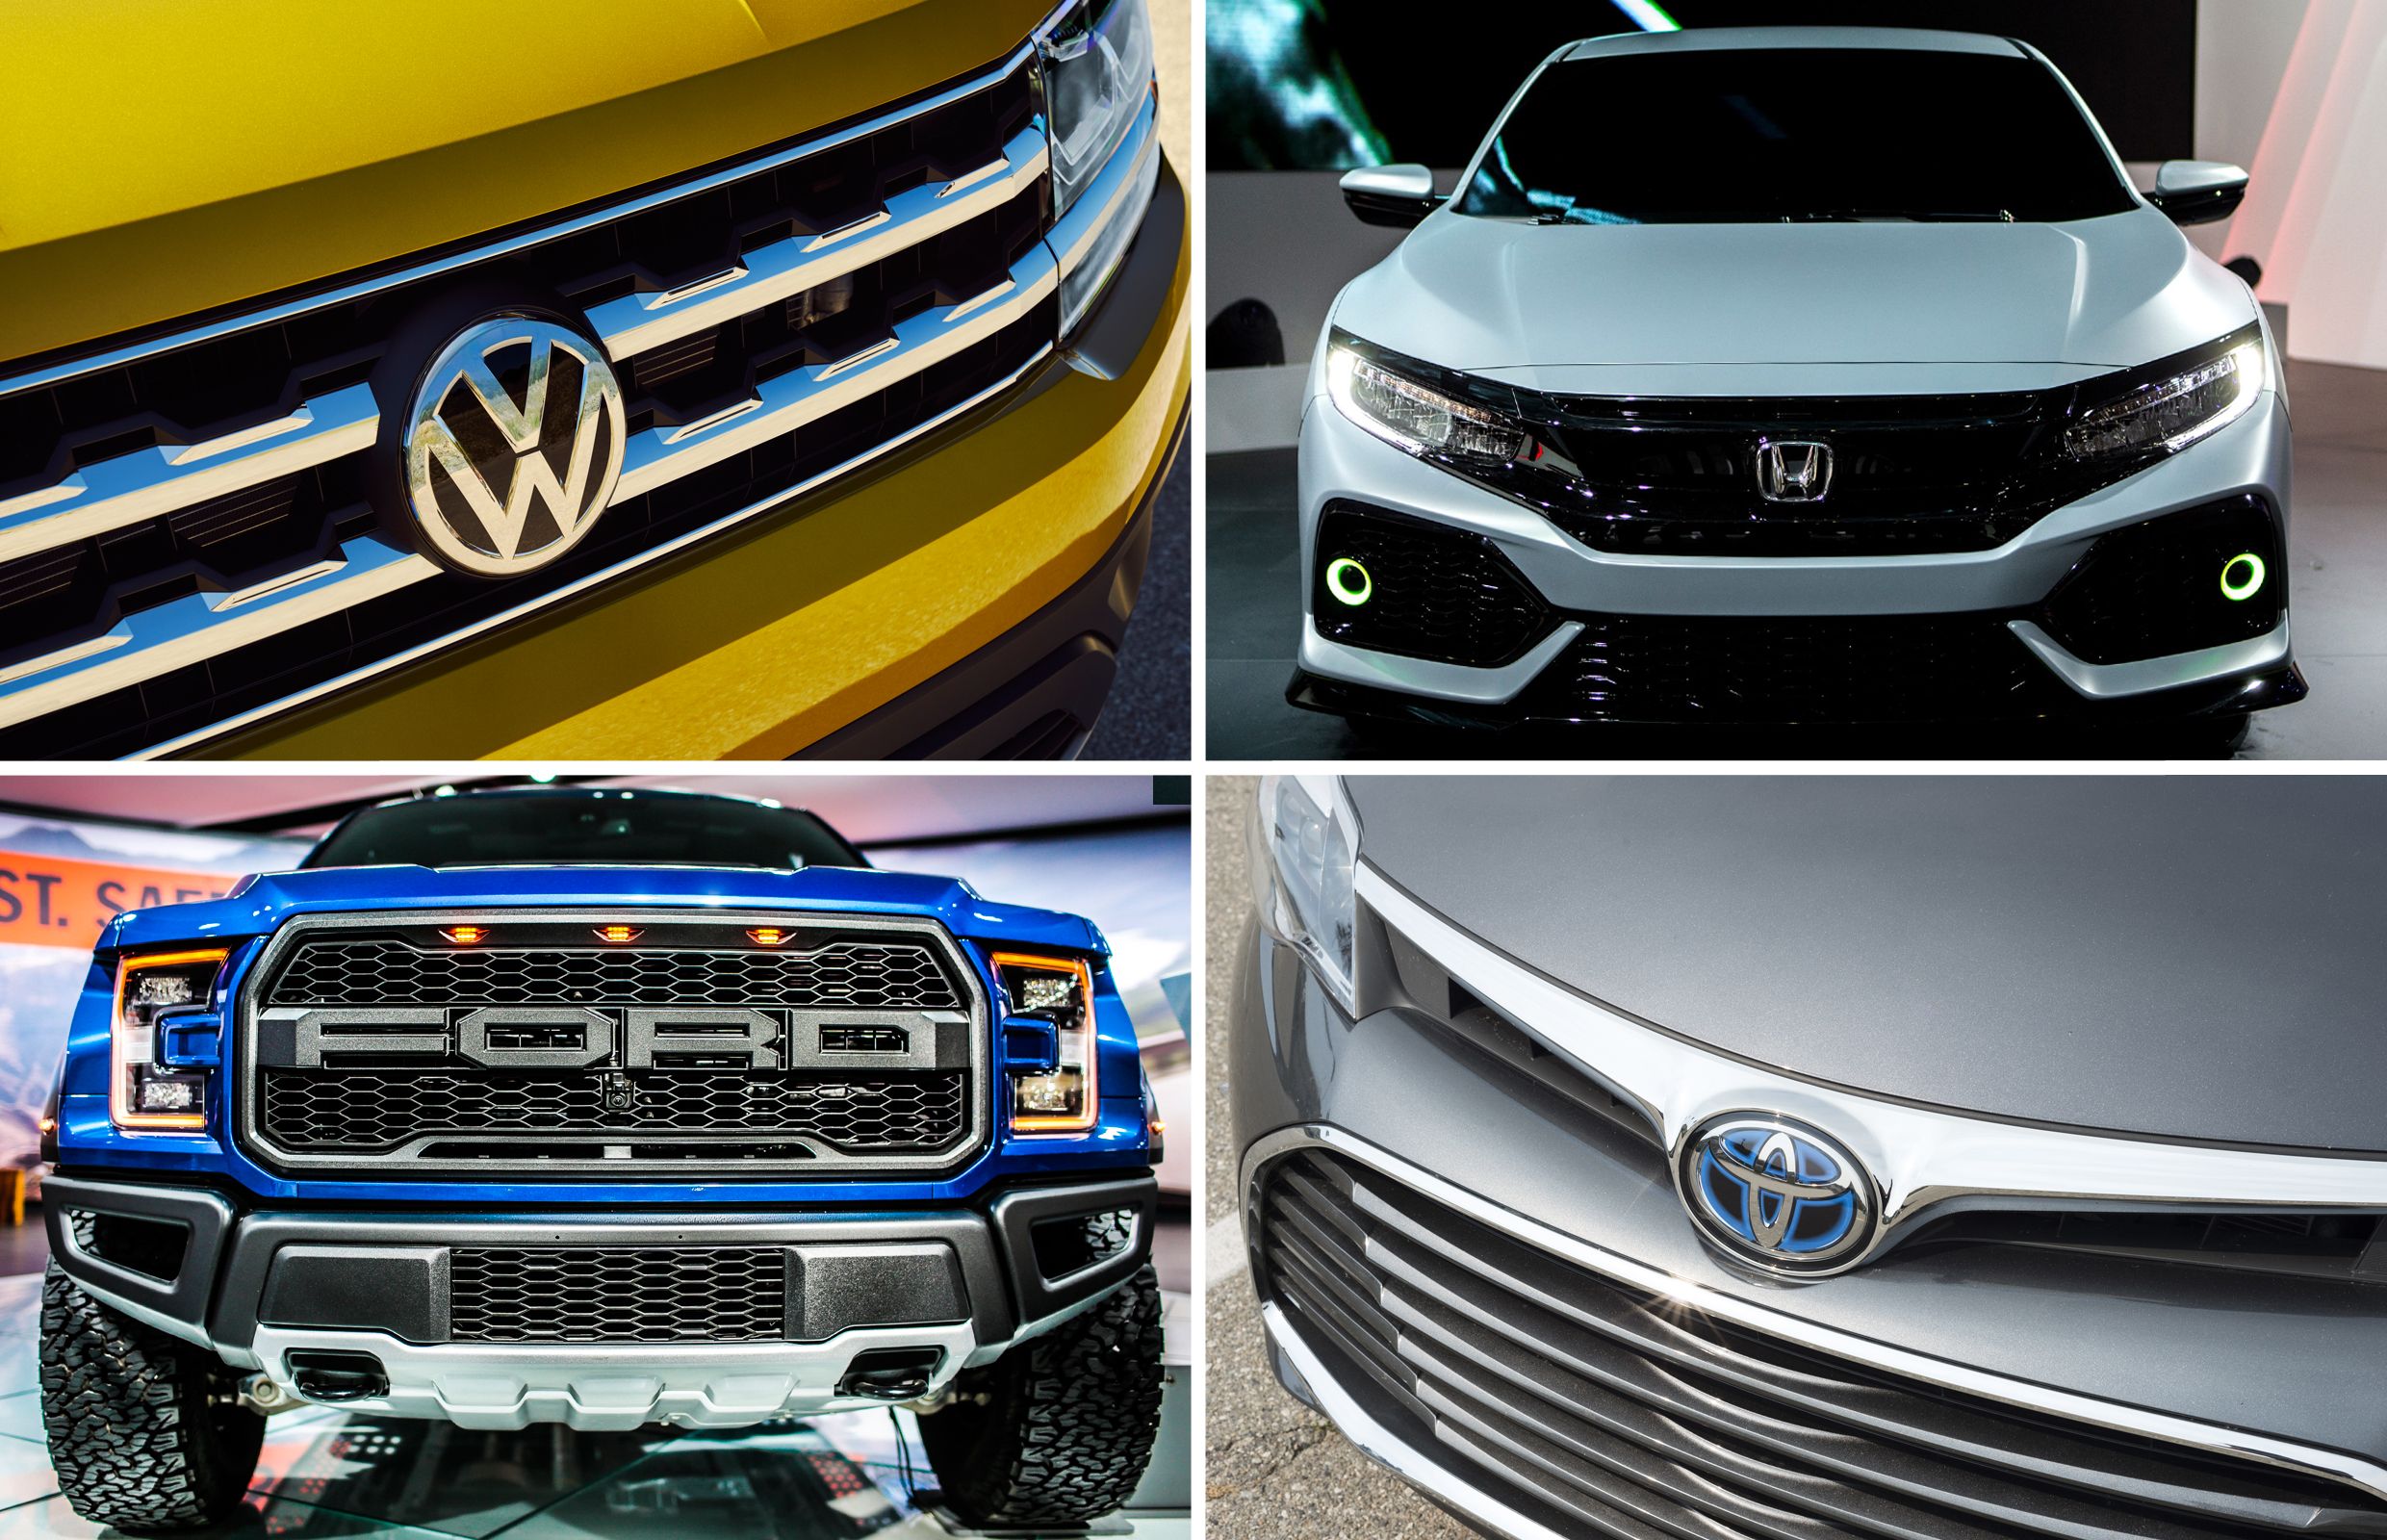 The Top 10 Leading Car Manufacturers Taking the World by Storm - Honda's top-selling vehicles and their cutting-edge technologies